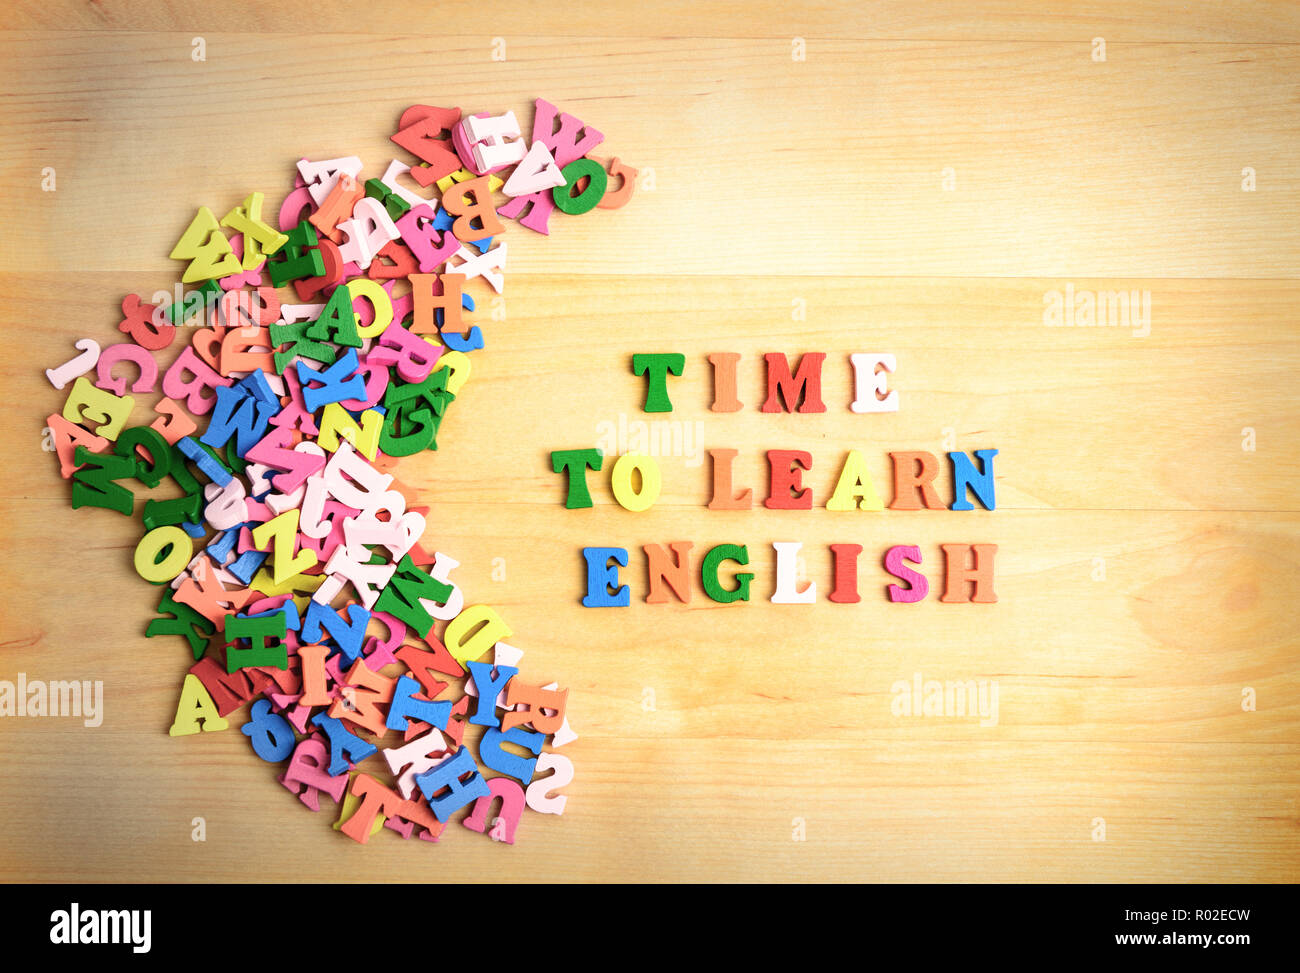 TIME TO LEARN ENGLISH wooden letters near a pile of other letters over wood board background Stock Photo